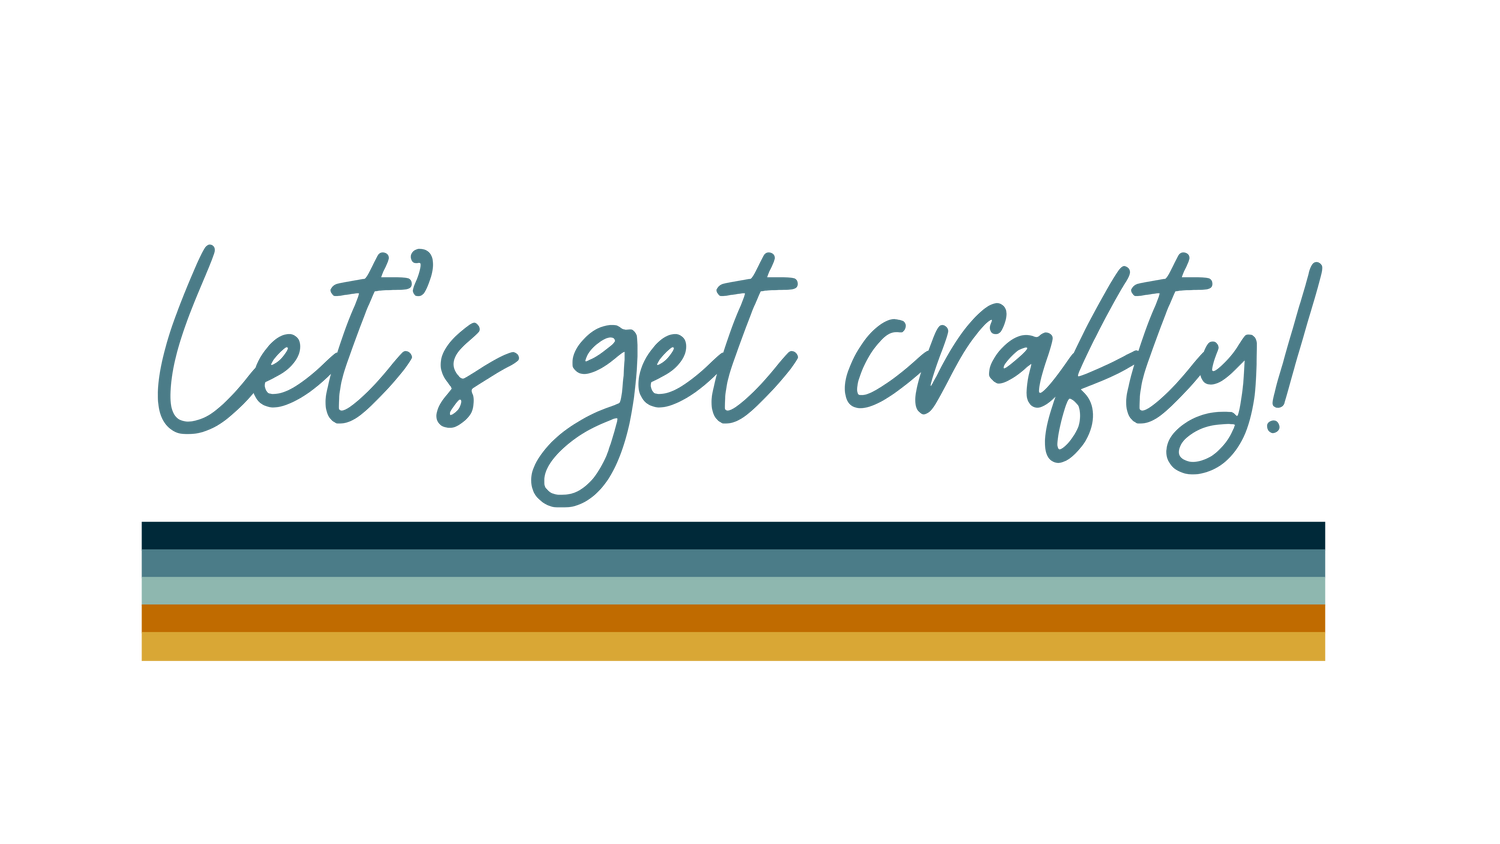 Lets get crafty with Brass and Bliss Craft Co